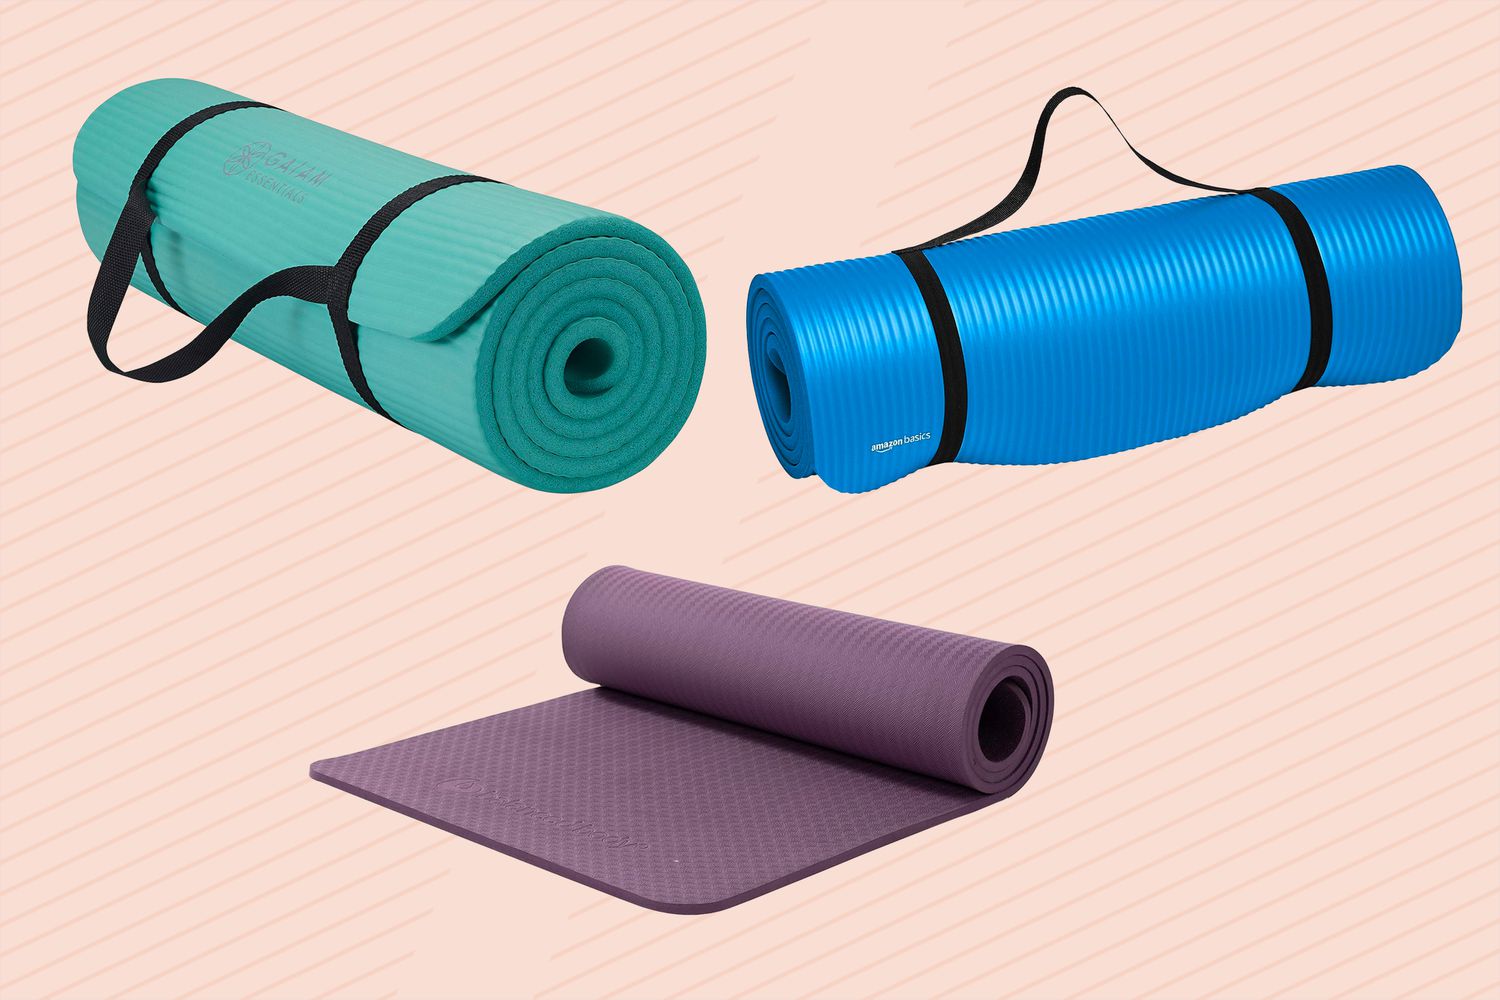 Pilates exercise mats we recommend on a striped background